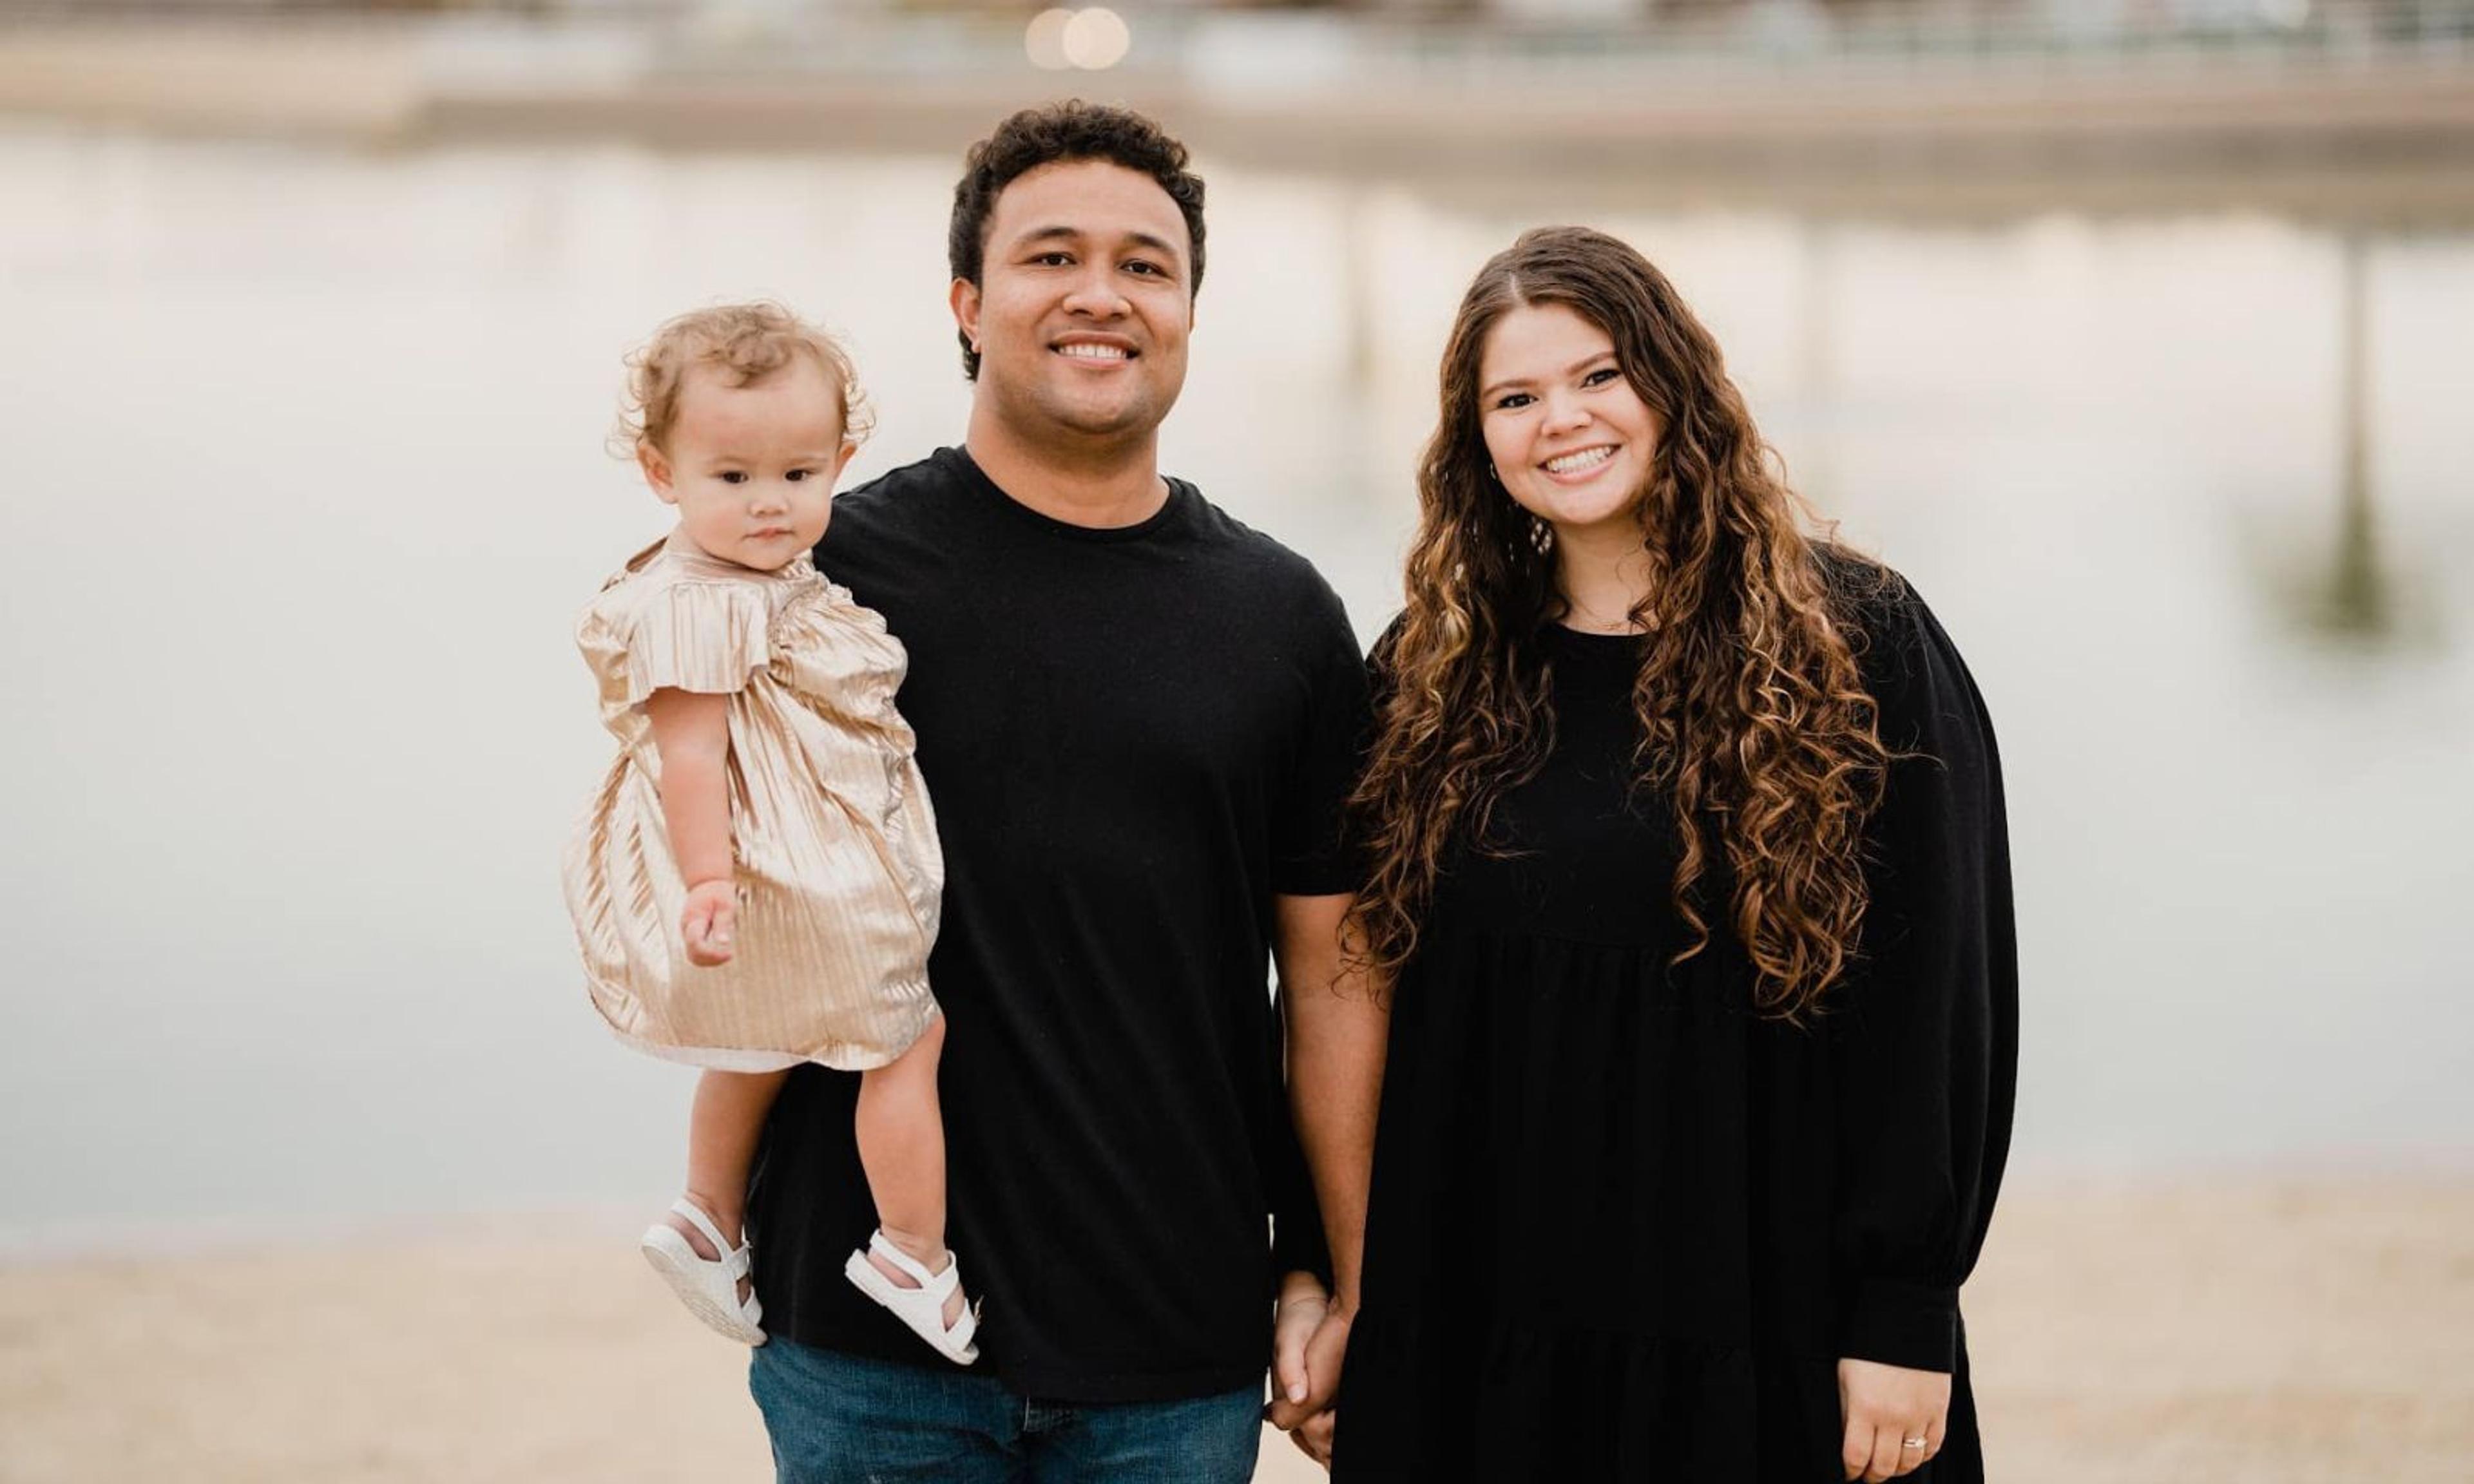 Katrina Kaufusi with her parents Manuevaha and Brianna have been living in Tongatapu since January 2023 and document their life of learning Tongan life and culture online.